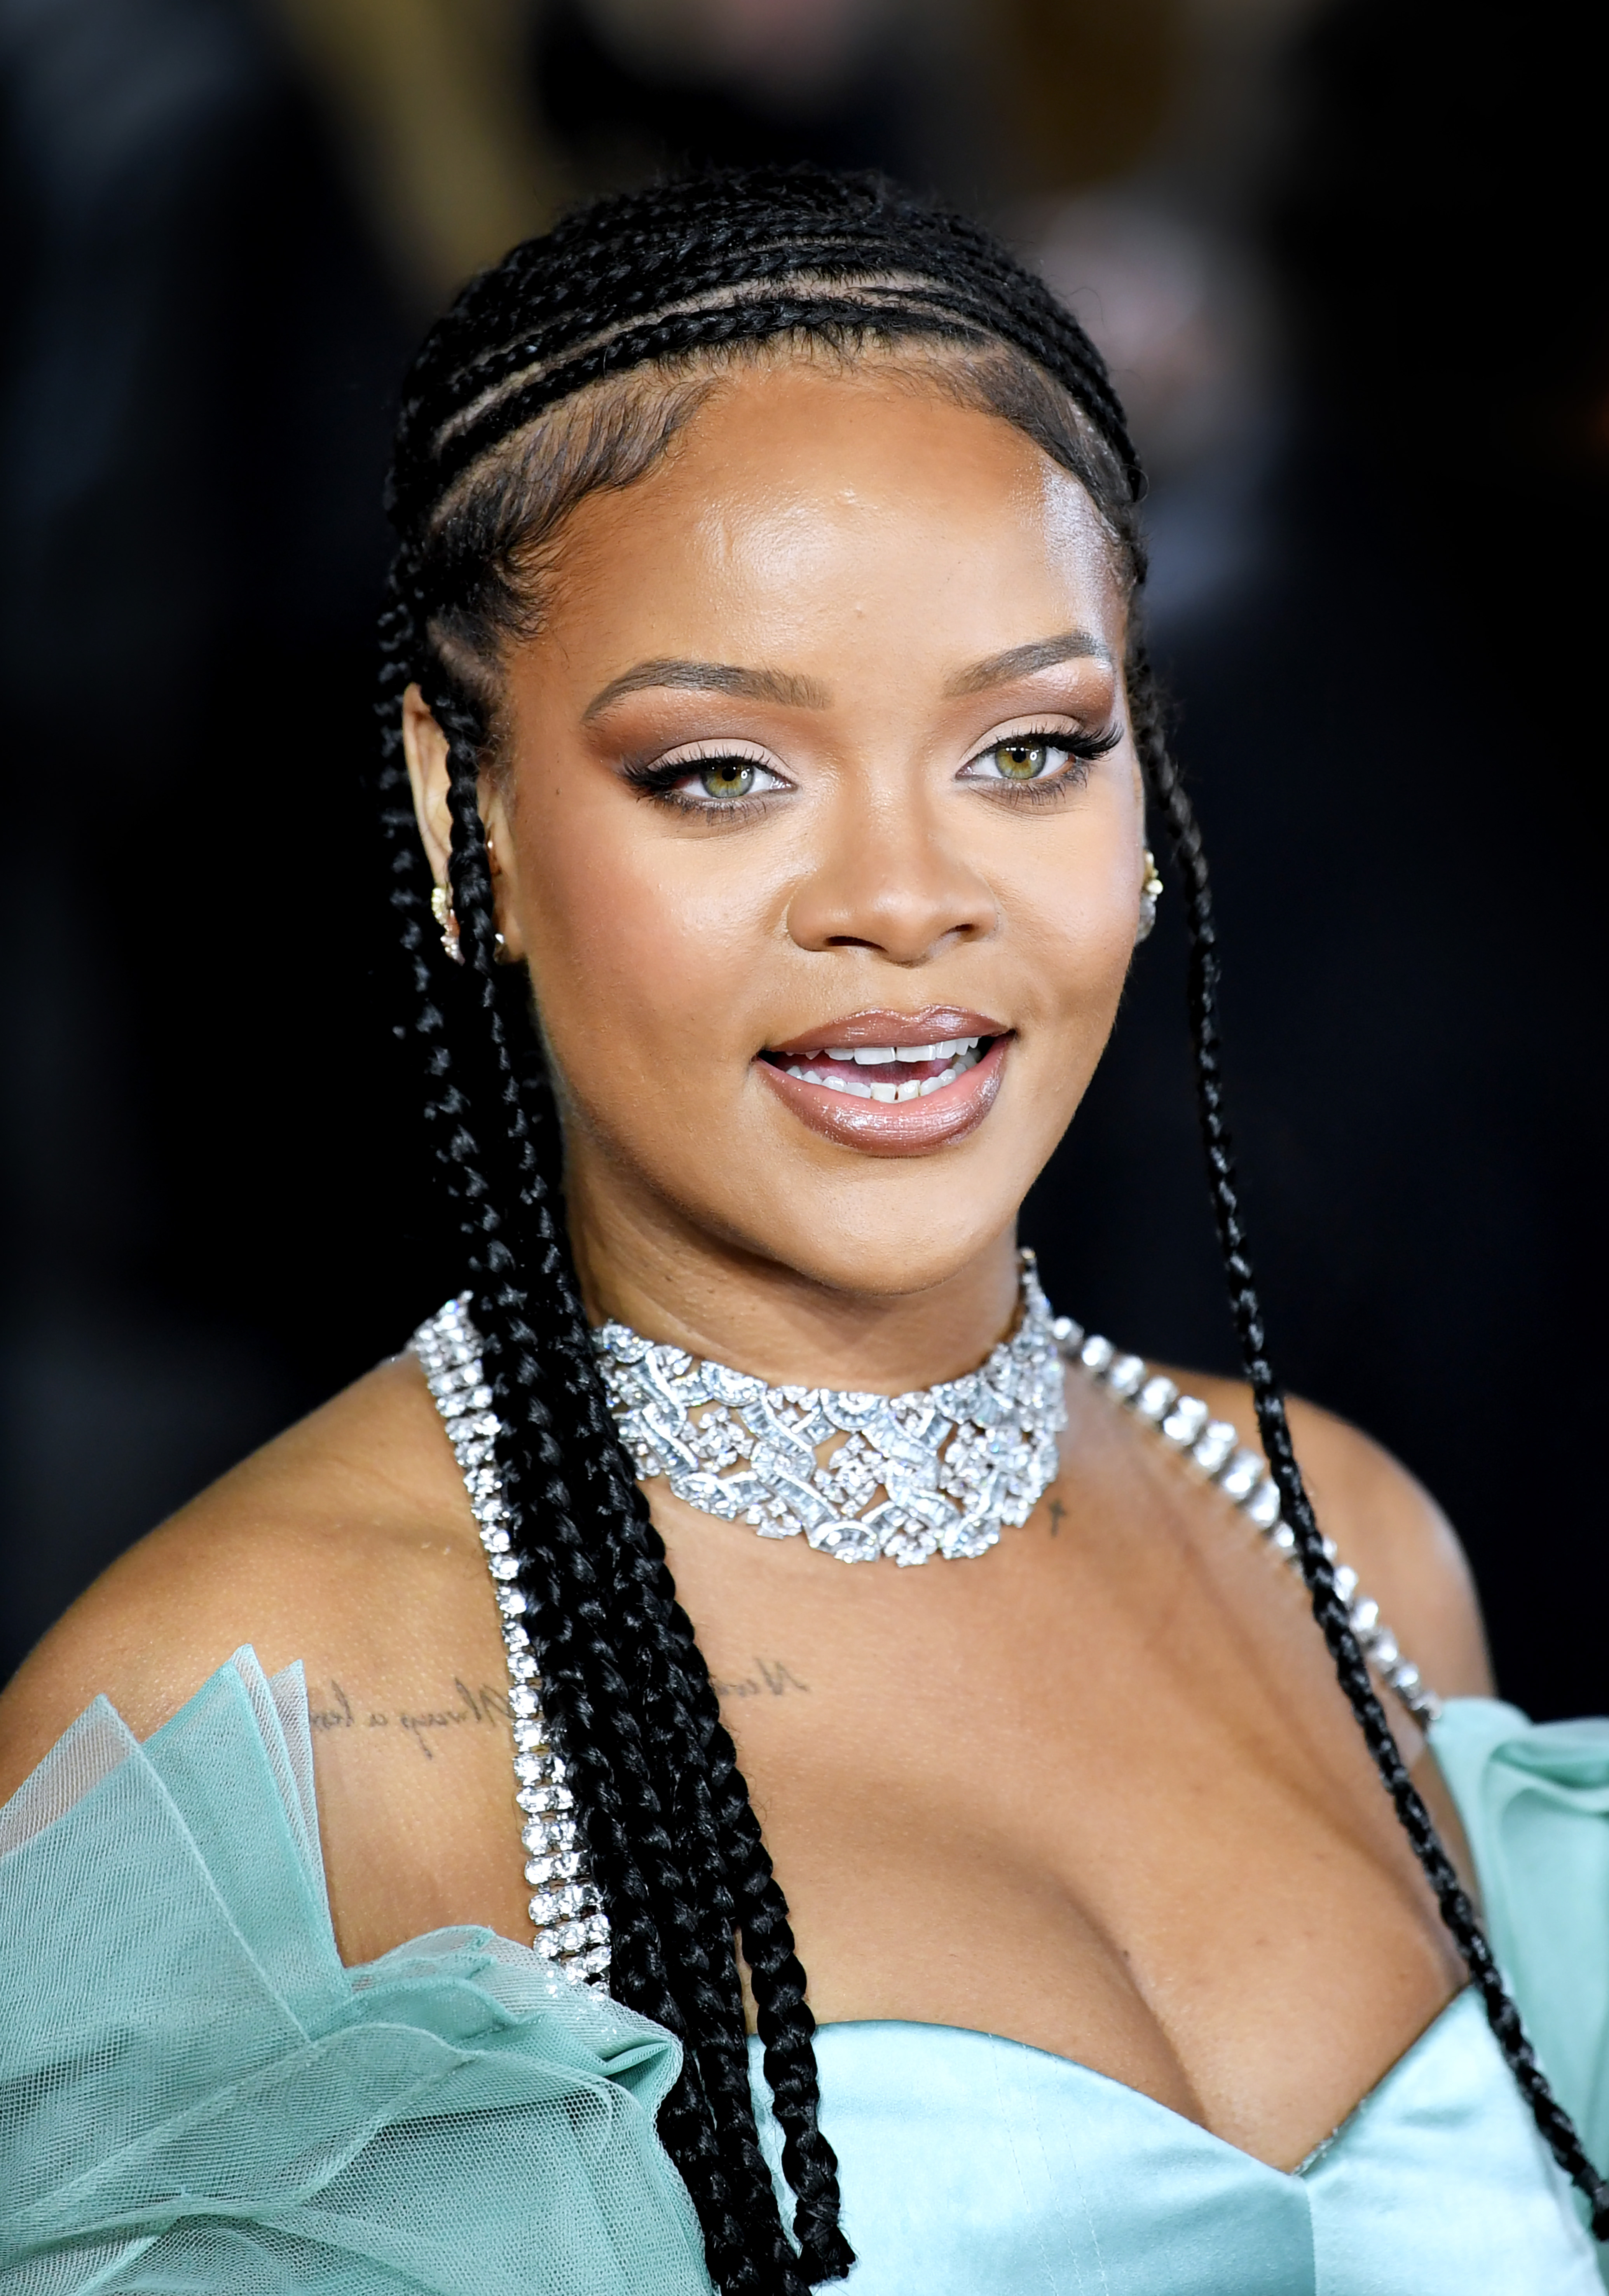 Rihanna at the Fashion Awards at the Royal Albert Hall in London on December 2, 2019 | Source: Getty Images